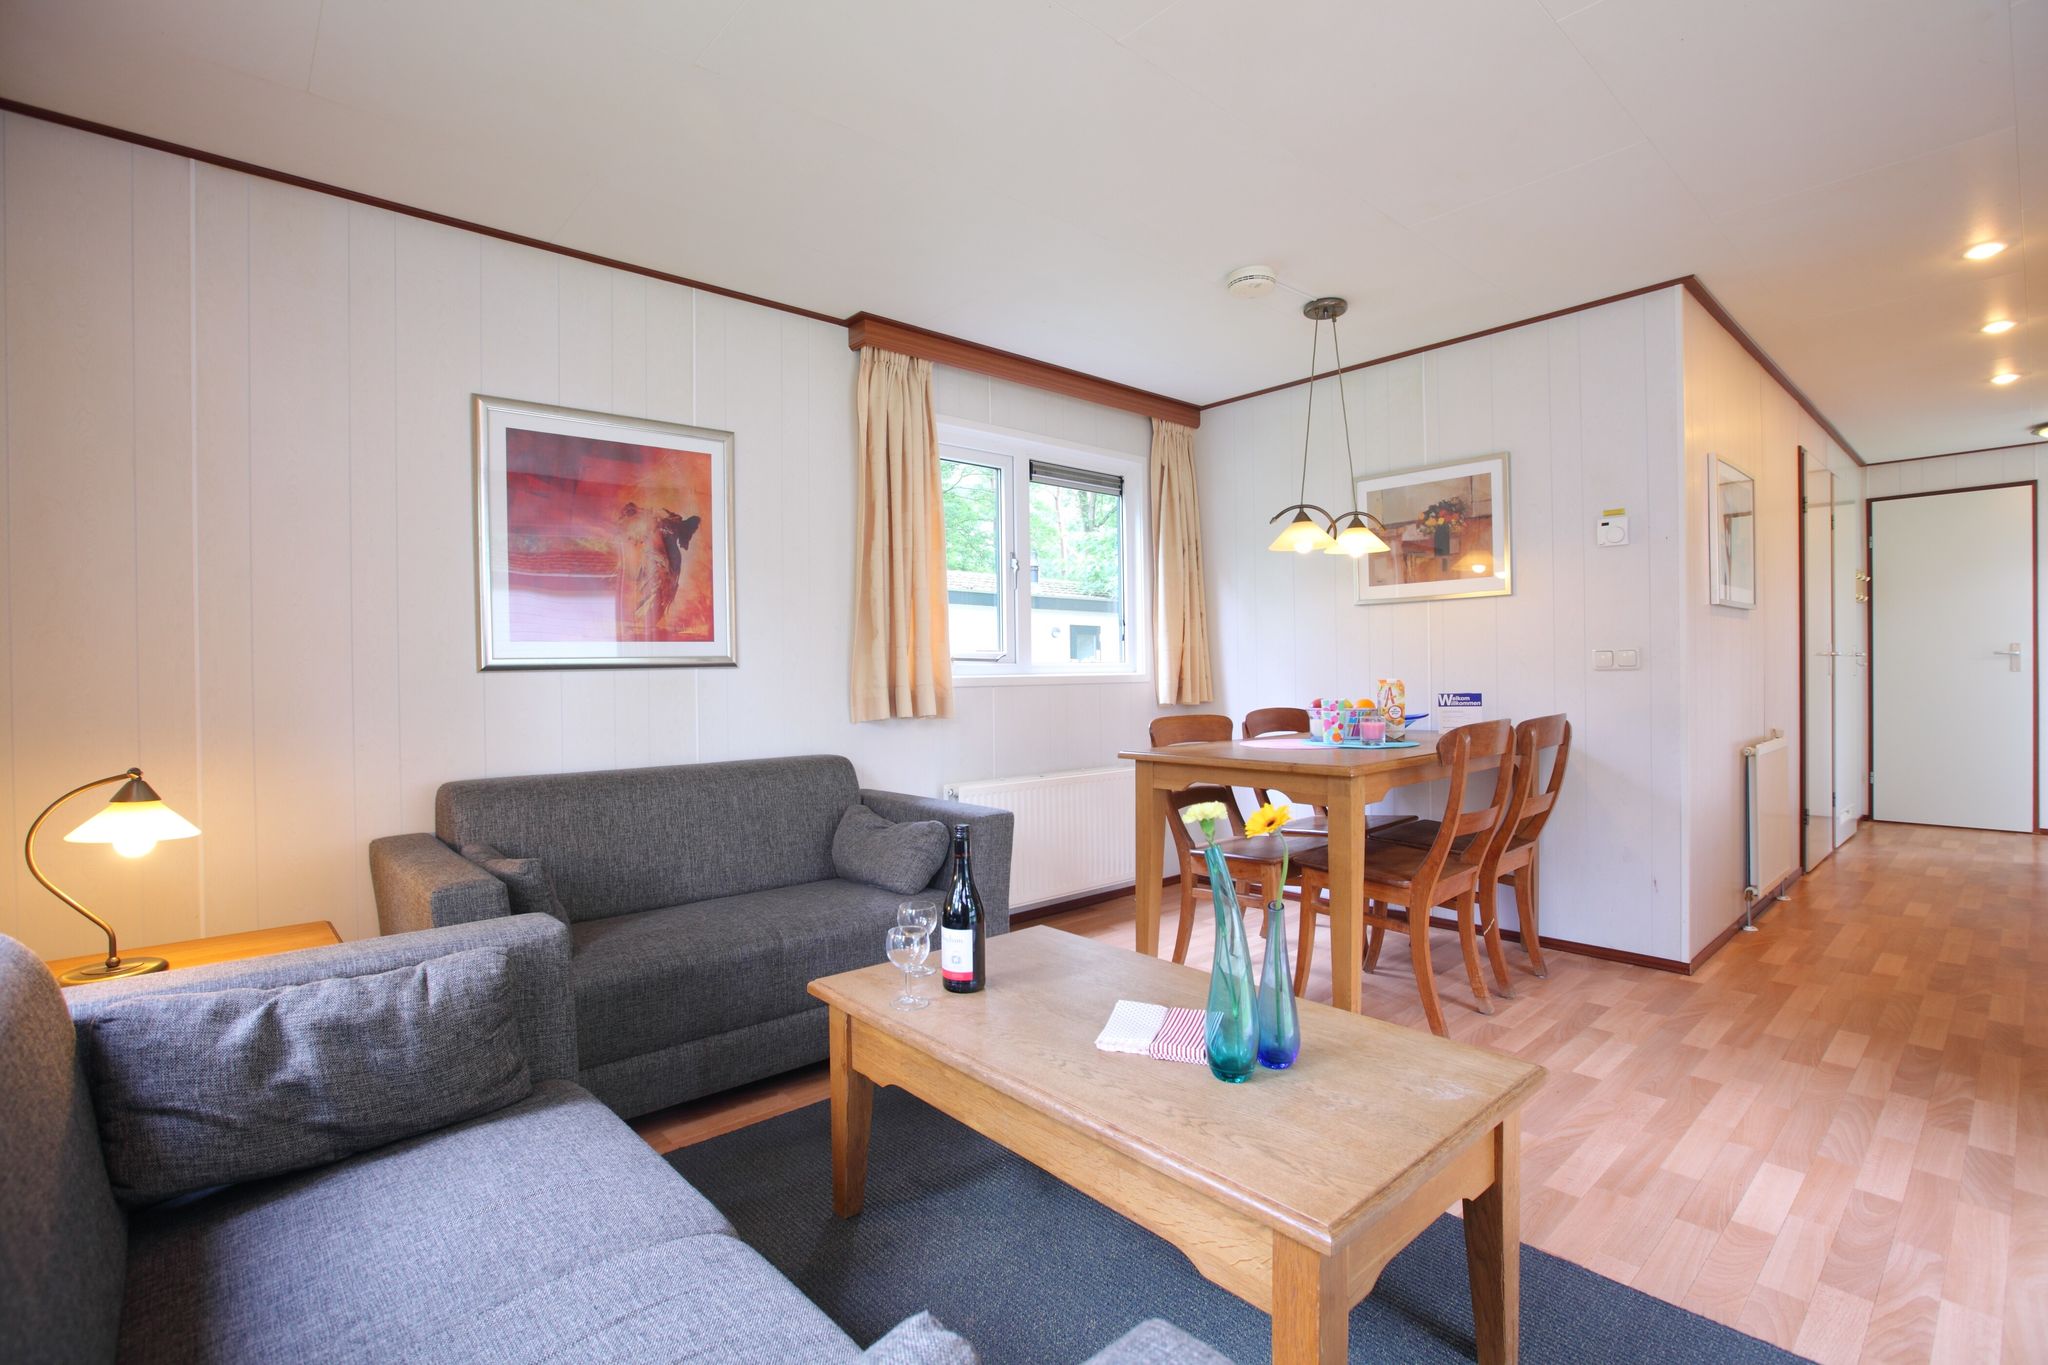 Tidy furnished chalet with a combi microwave, in the Veluwe